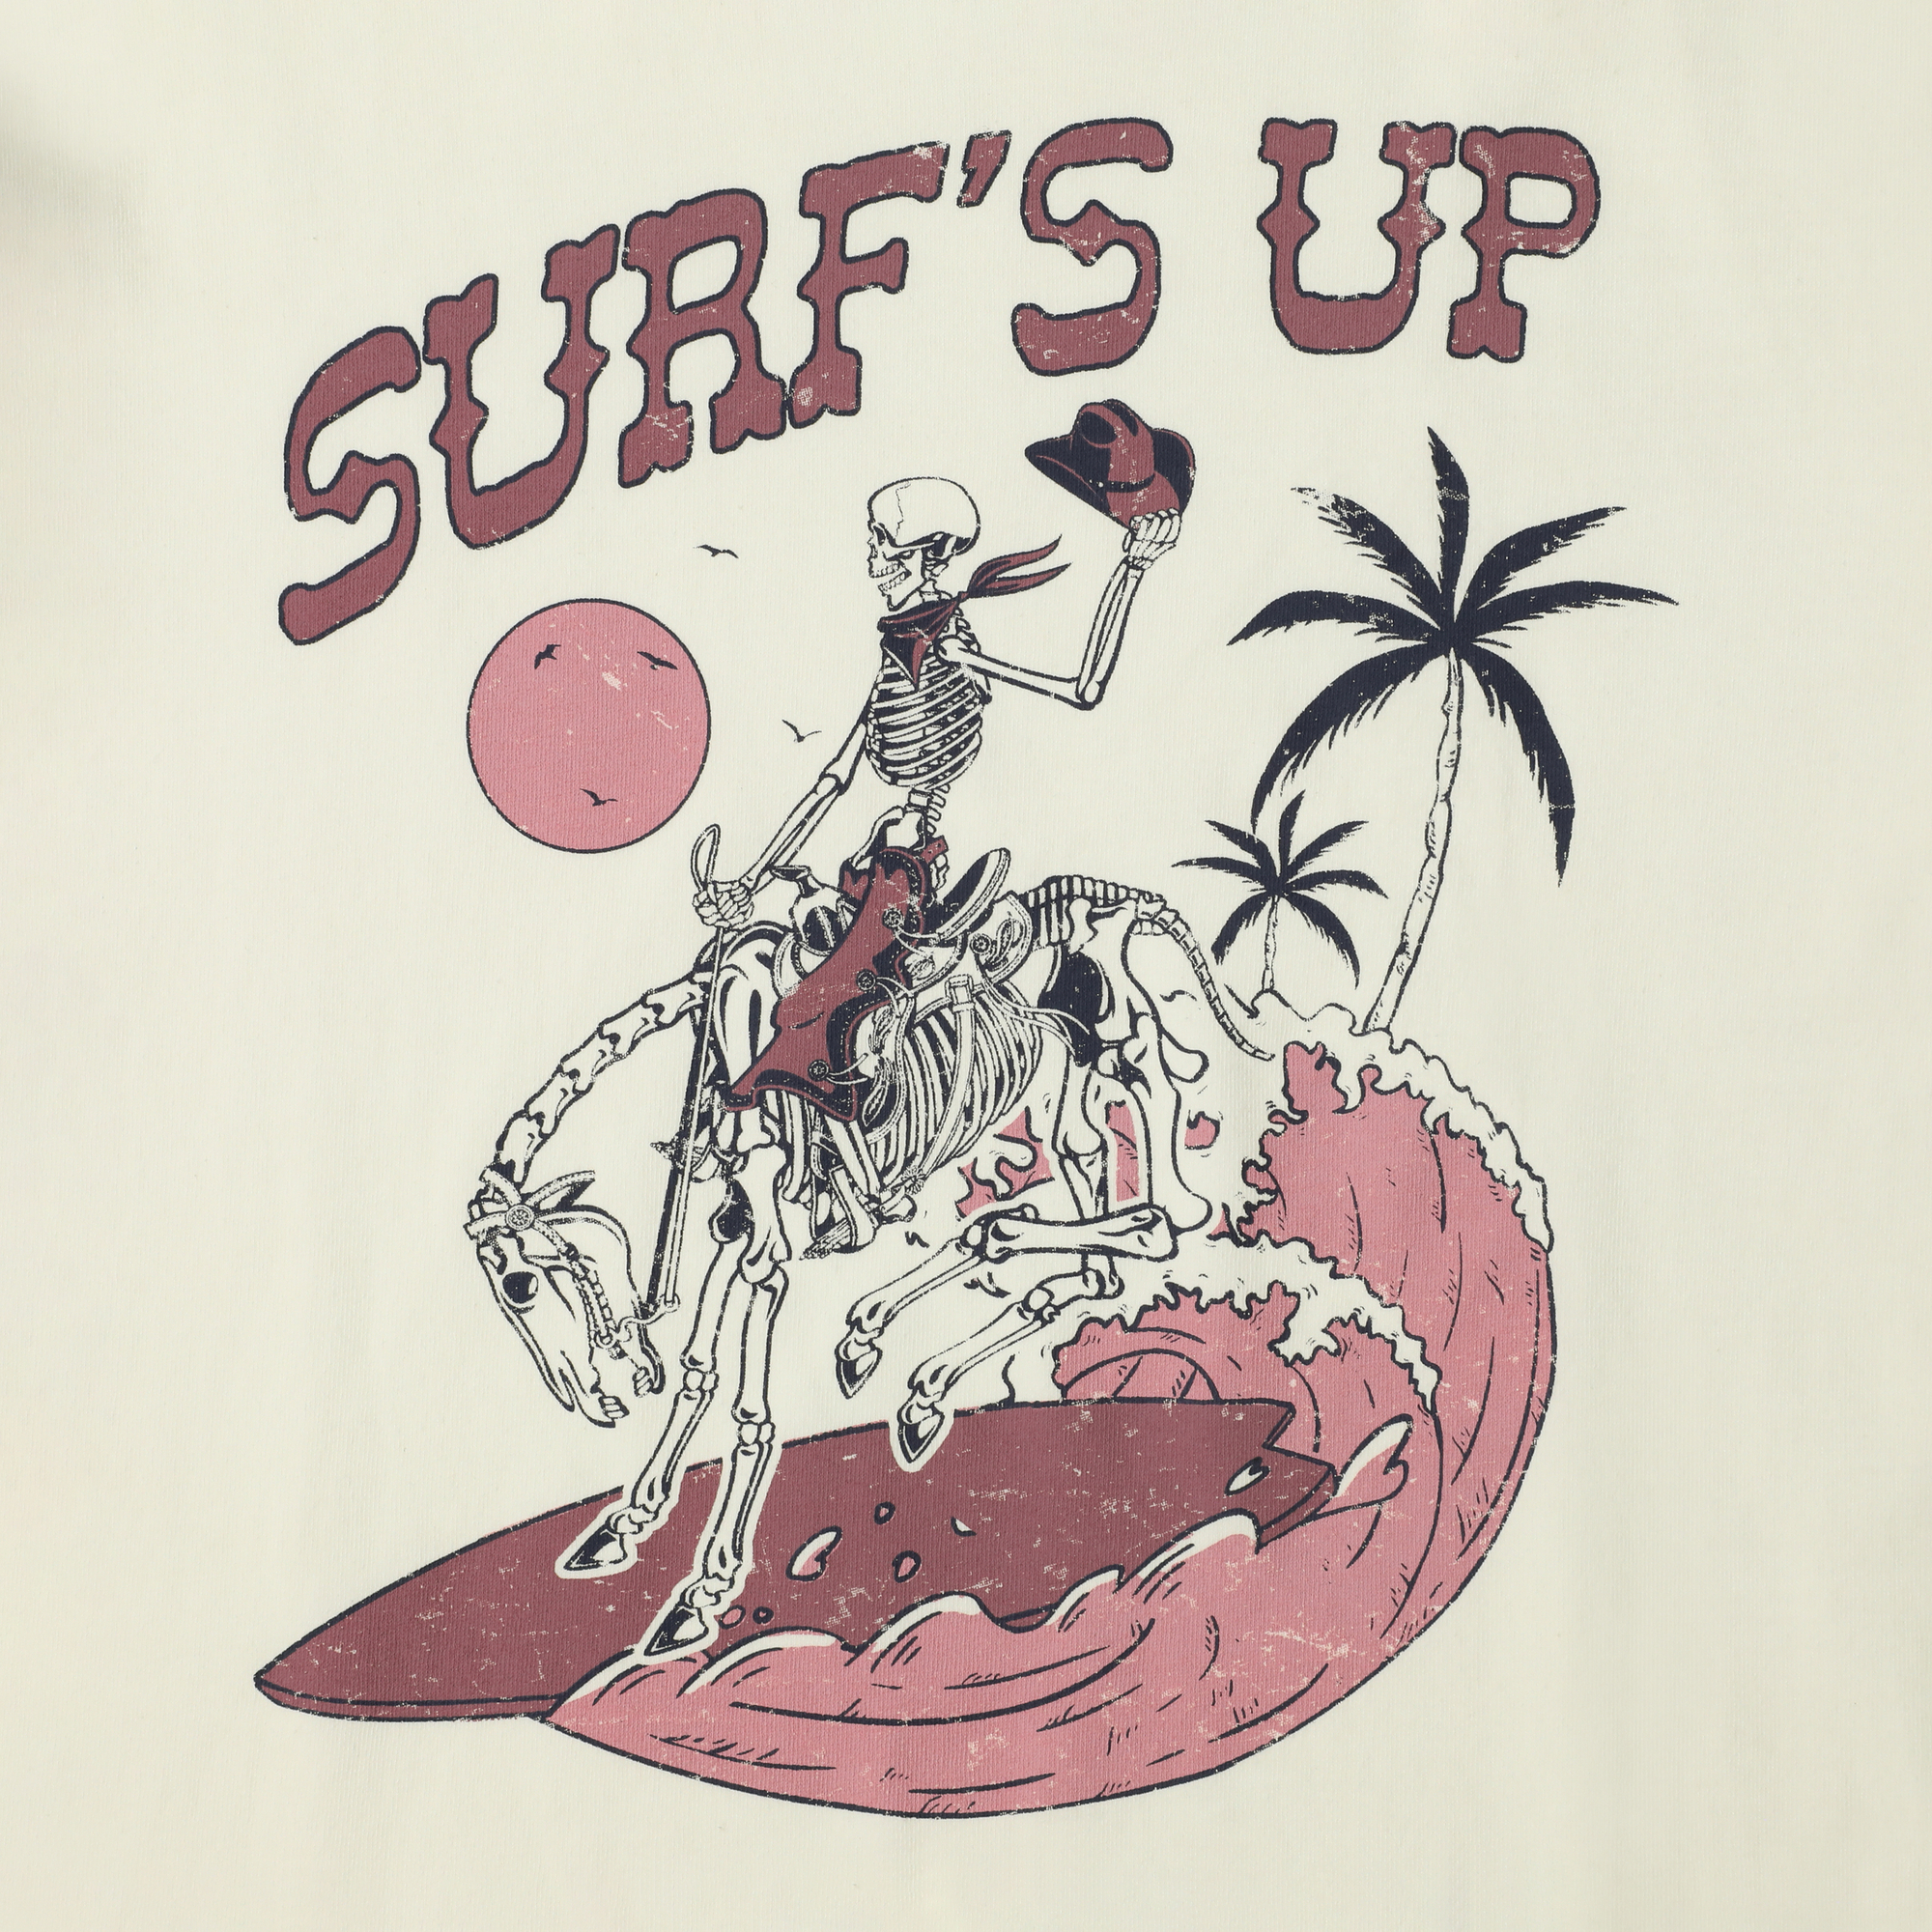 skeleton cowboy 'surf's up' graphic tee